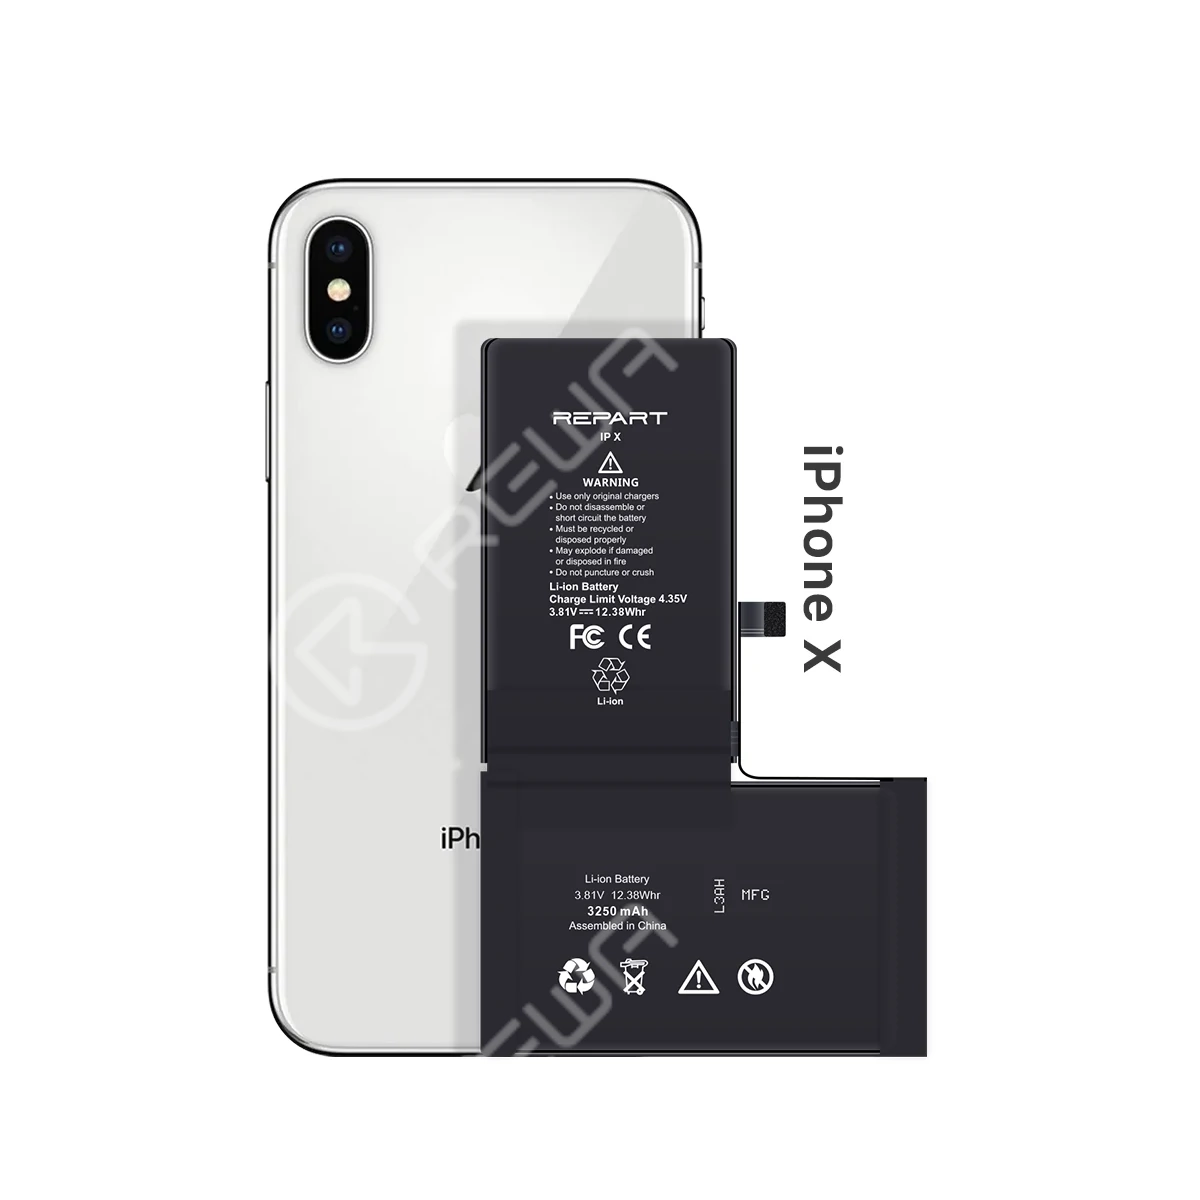 Paard Noord West eb REPART iPhone X High Capacity Battery Replacement - Prime